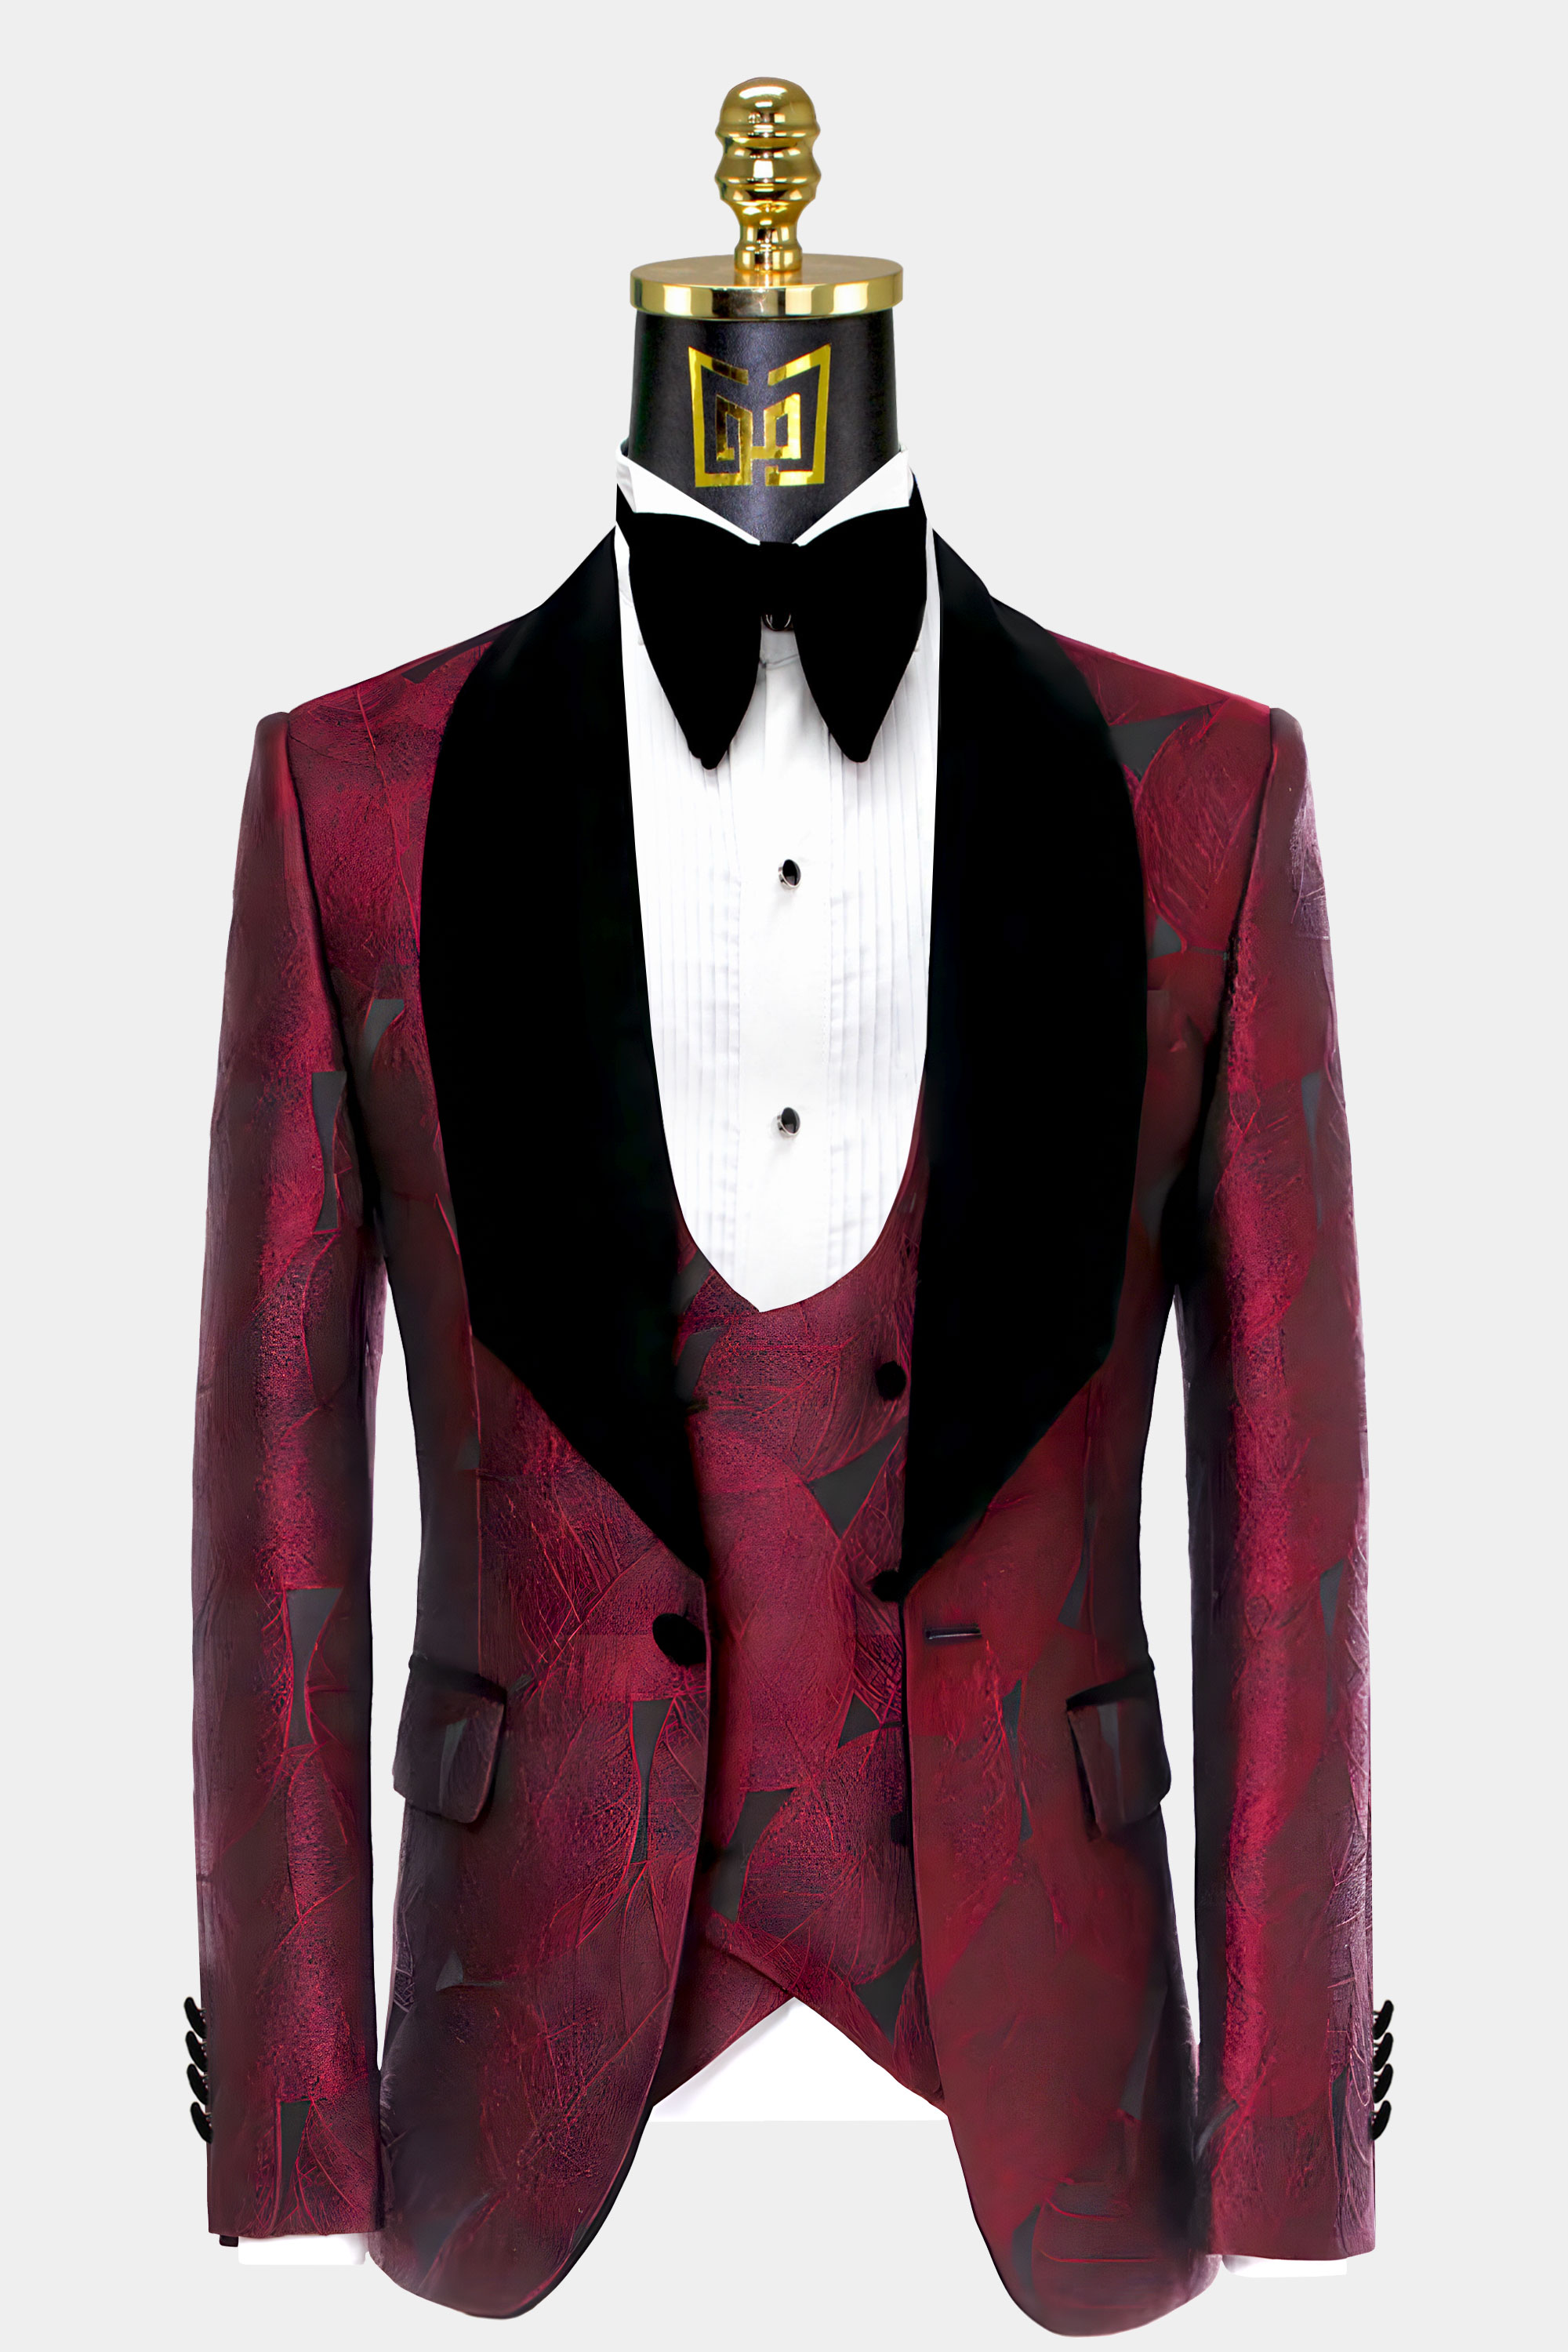 Maroon and black pant suit - dark red and black tuxedo- maroon and ...